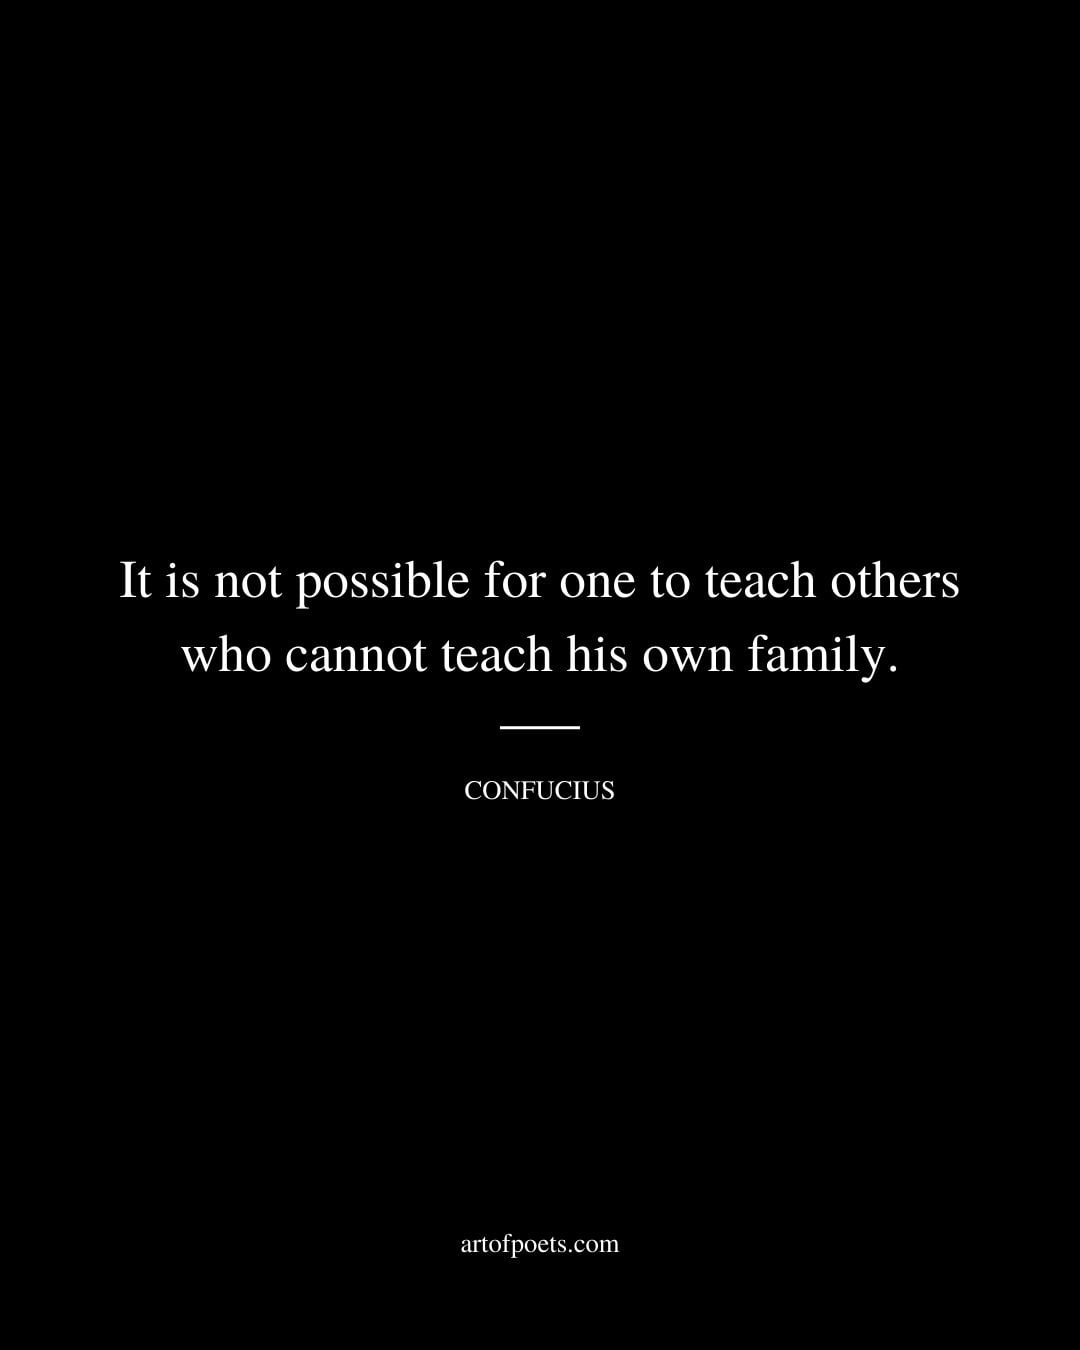 It is not possible for one to teach others who cannot teach his own family